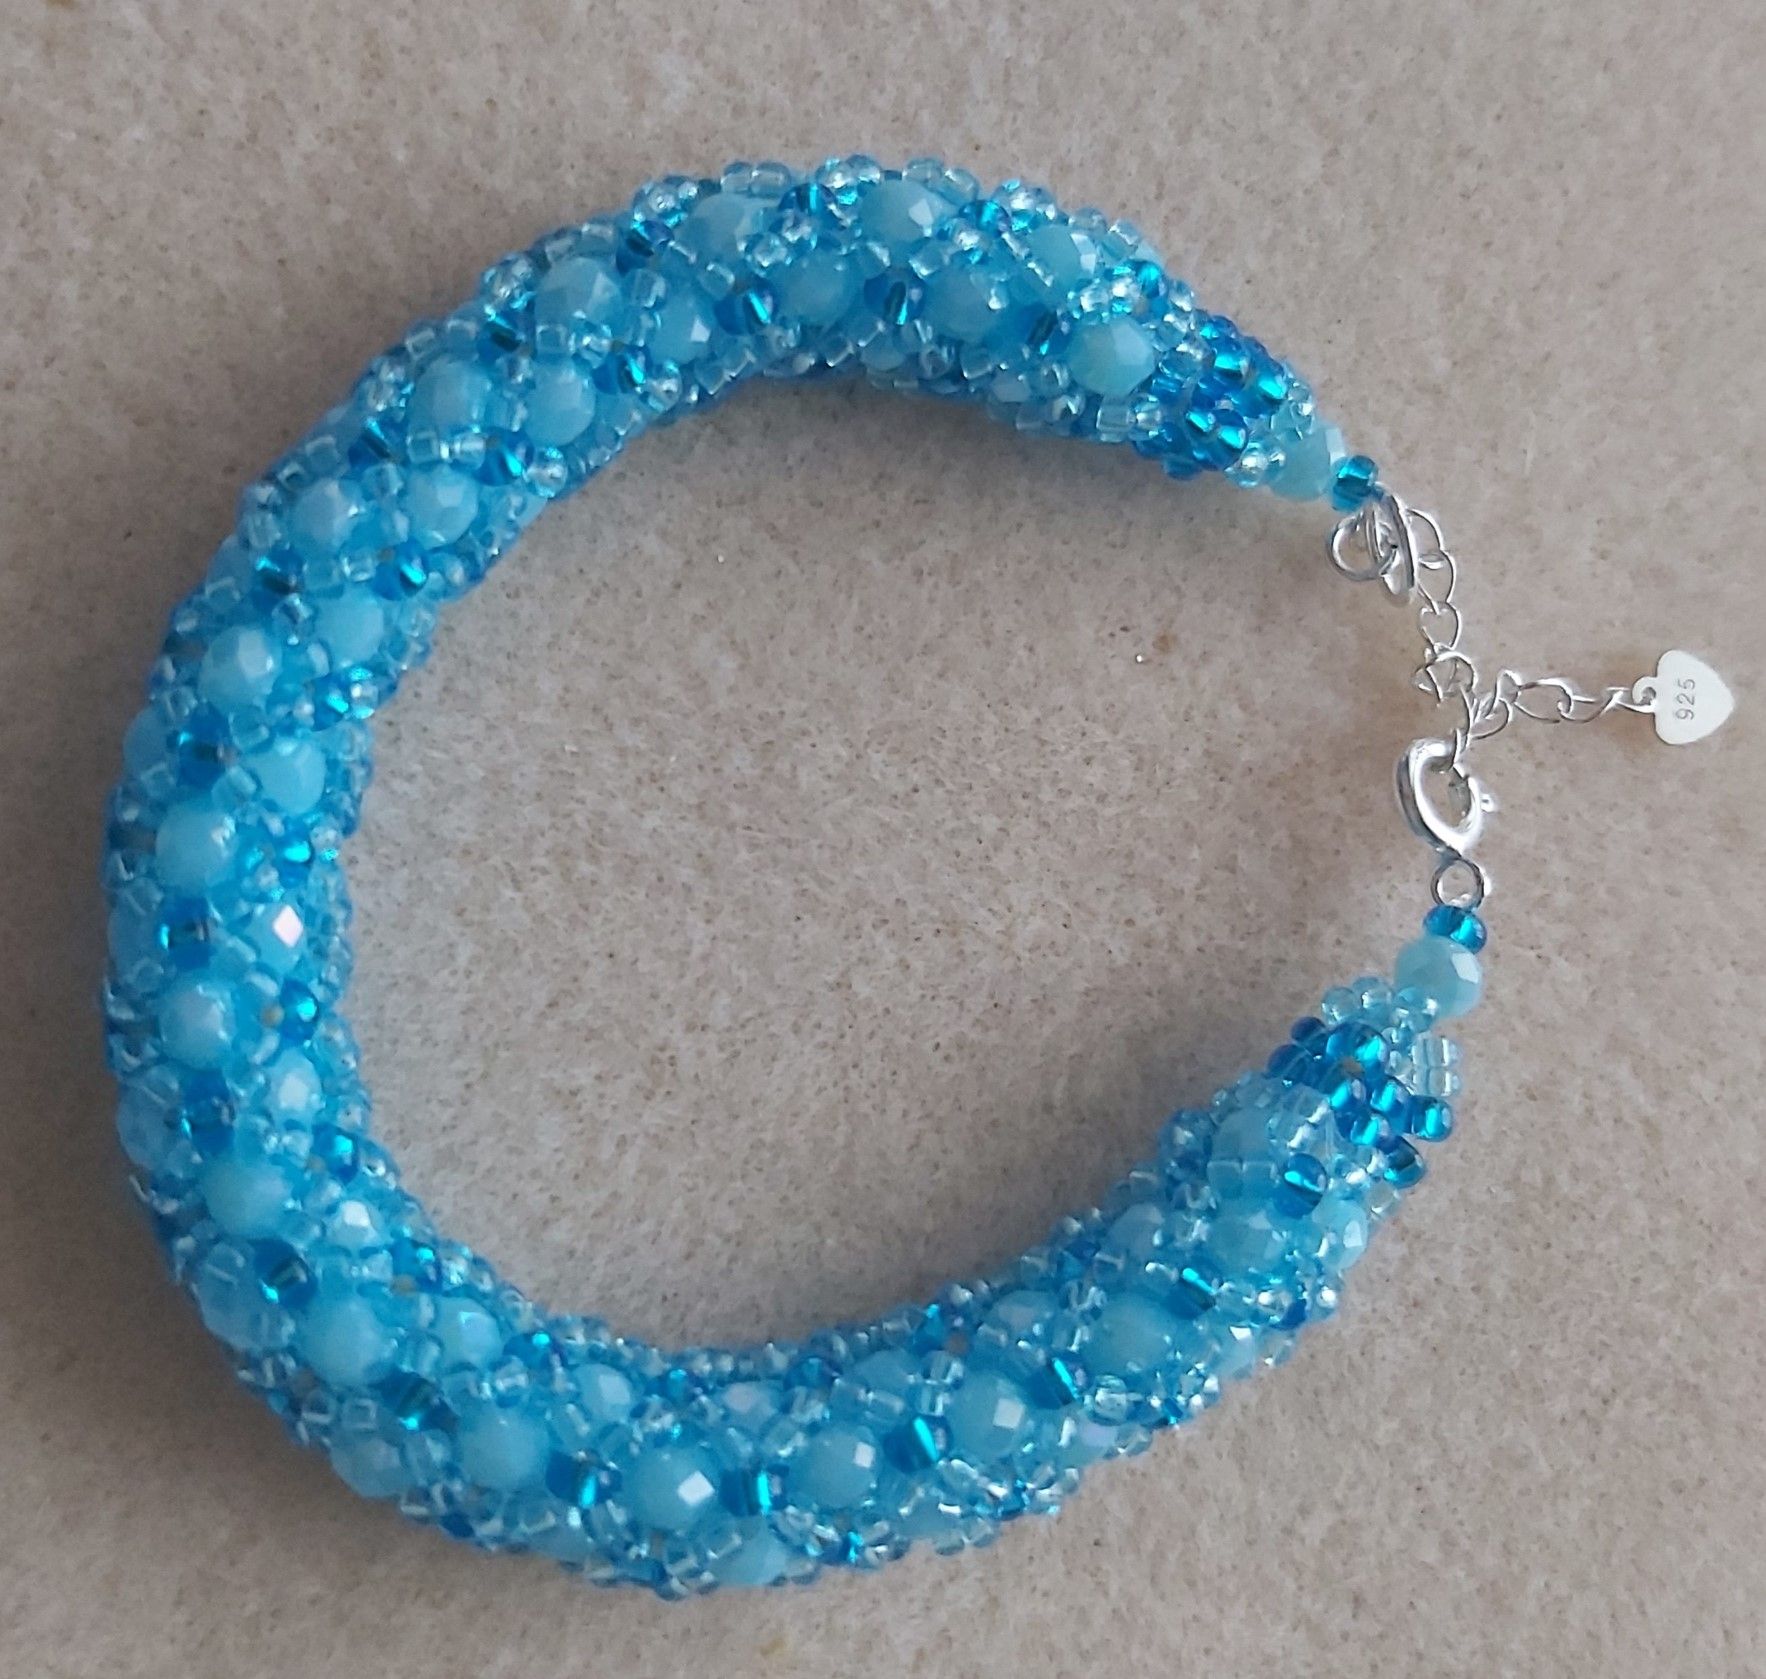 Transparent Blue White Luster 4mm Faceted Rondelle Crystals & Miyuki Opaque Blue seed beads, Sterling Silver Clasp